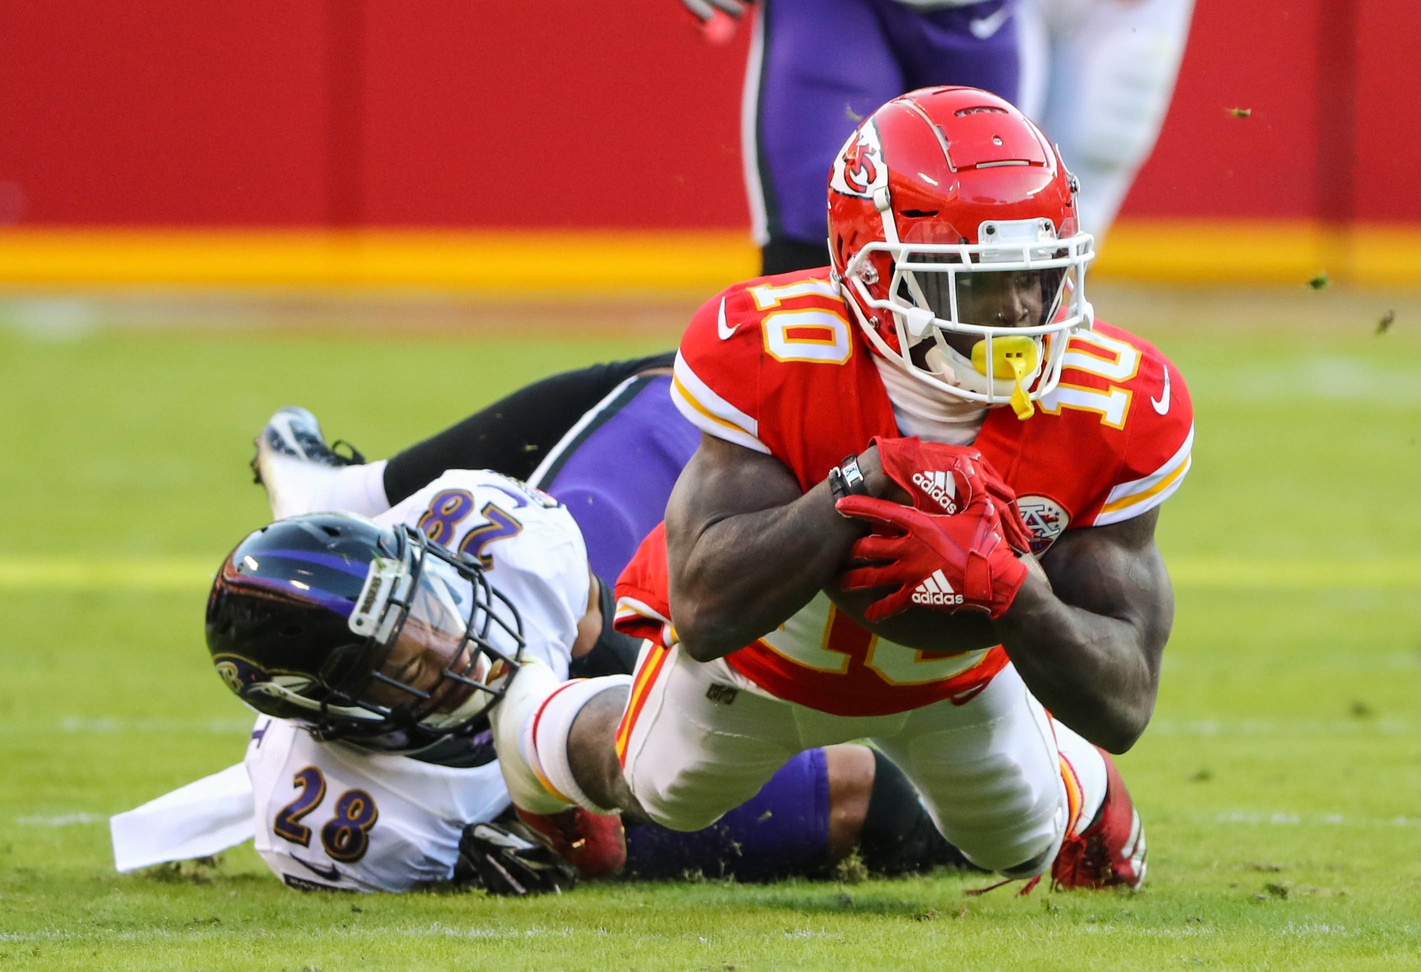 Tyreek Hill will play on Thursday night vs. Chargers